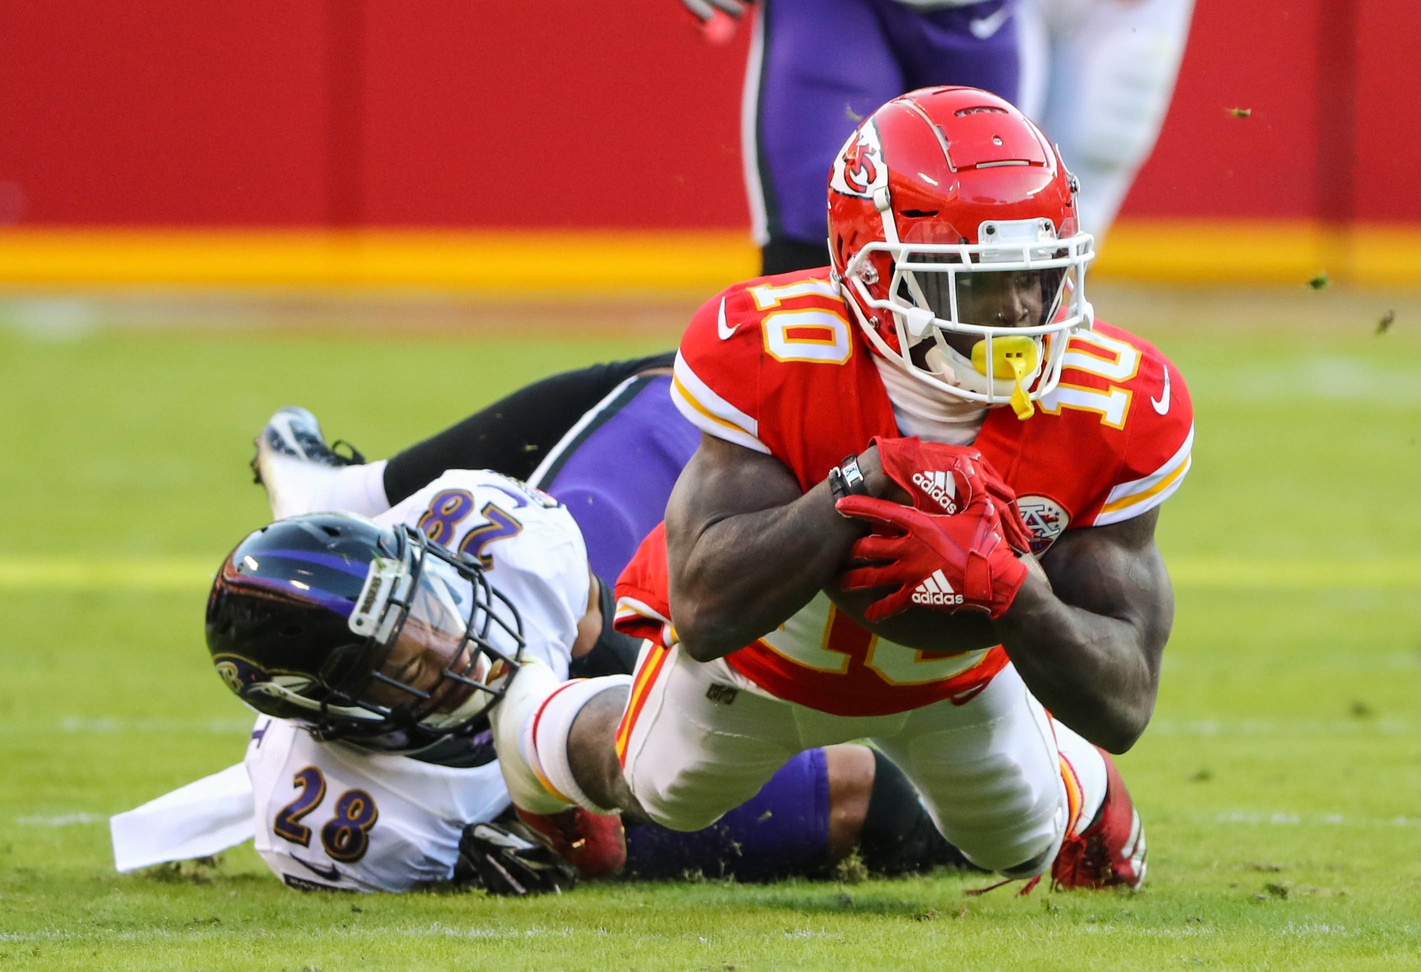 Tyreek Hill will play on Thursday night vs. Chargers